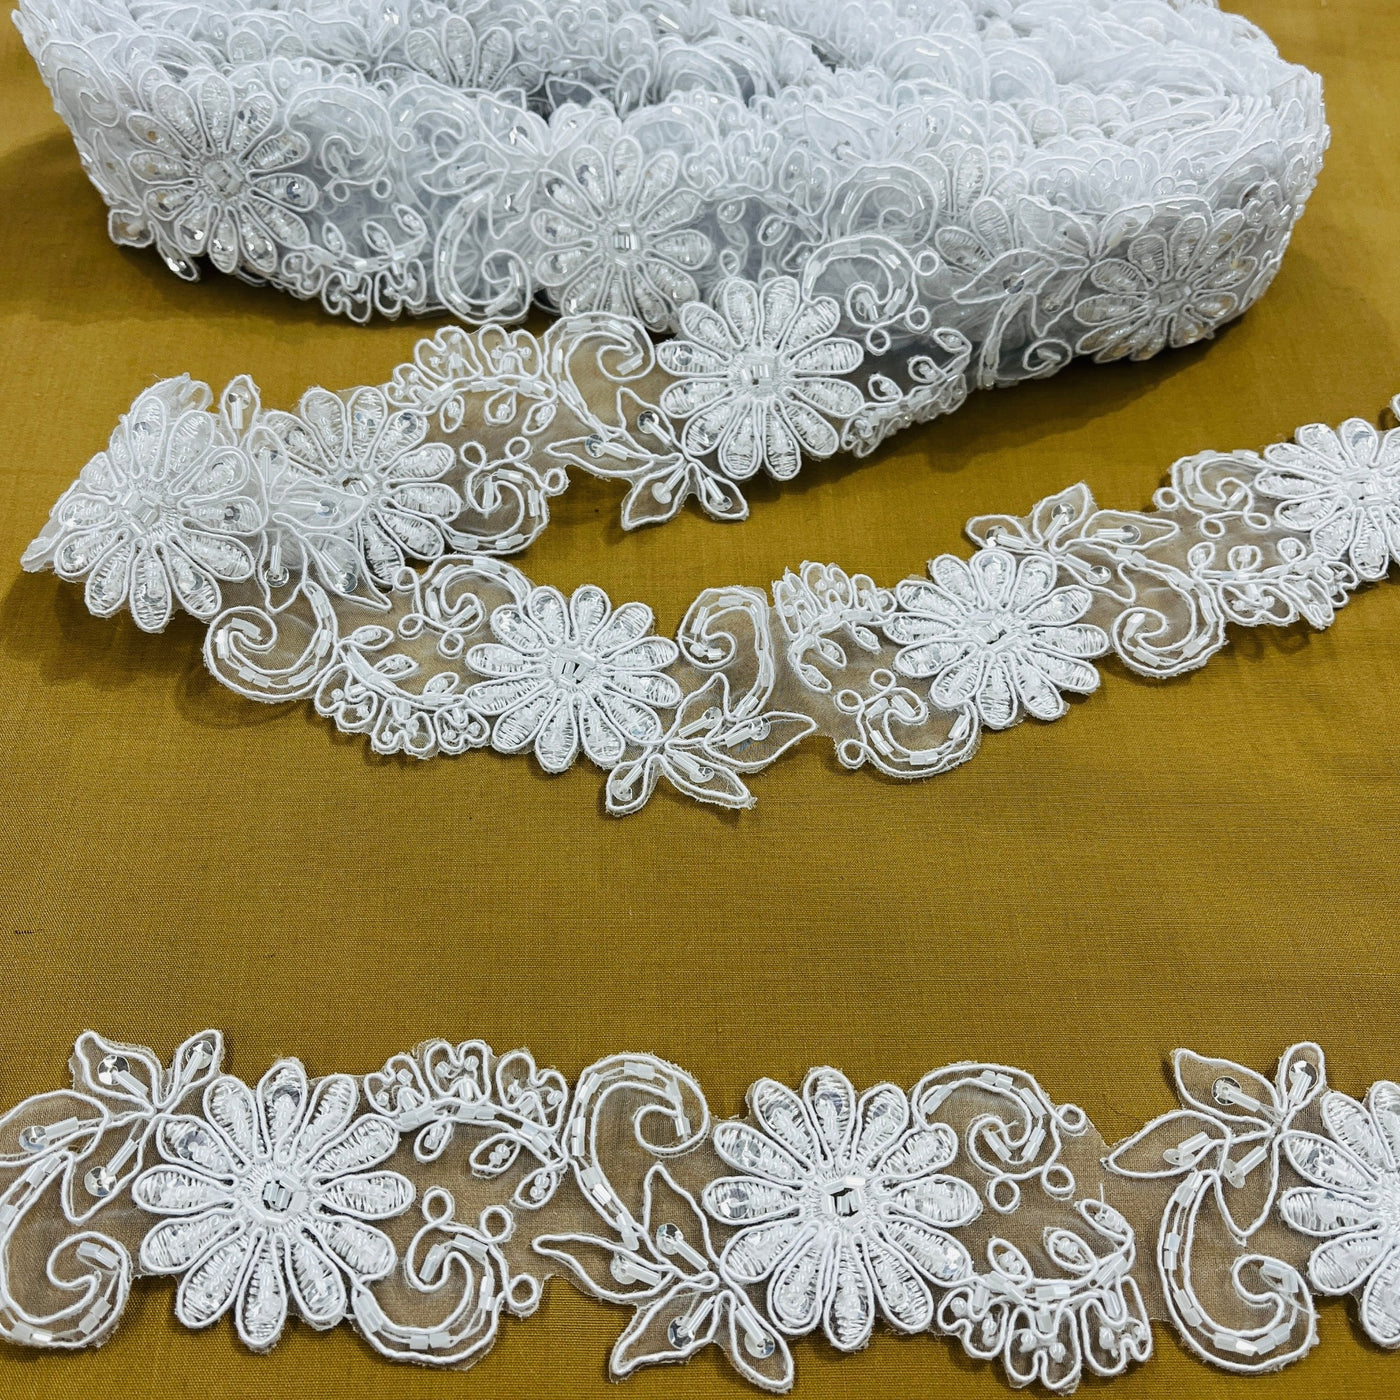 Beaded & Corded Lace Trimming Embroidered on 100% Polyester Organza  | Lace USA - 96275N-BP